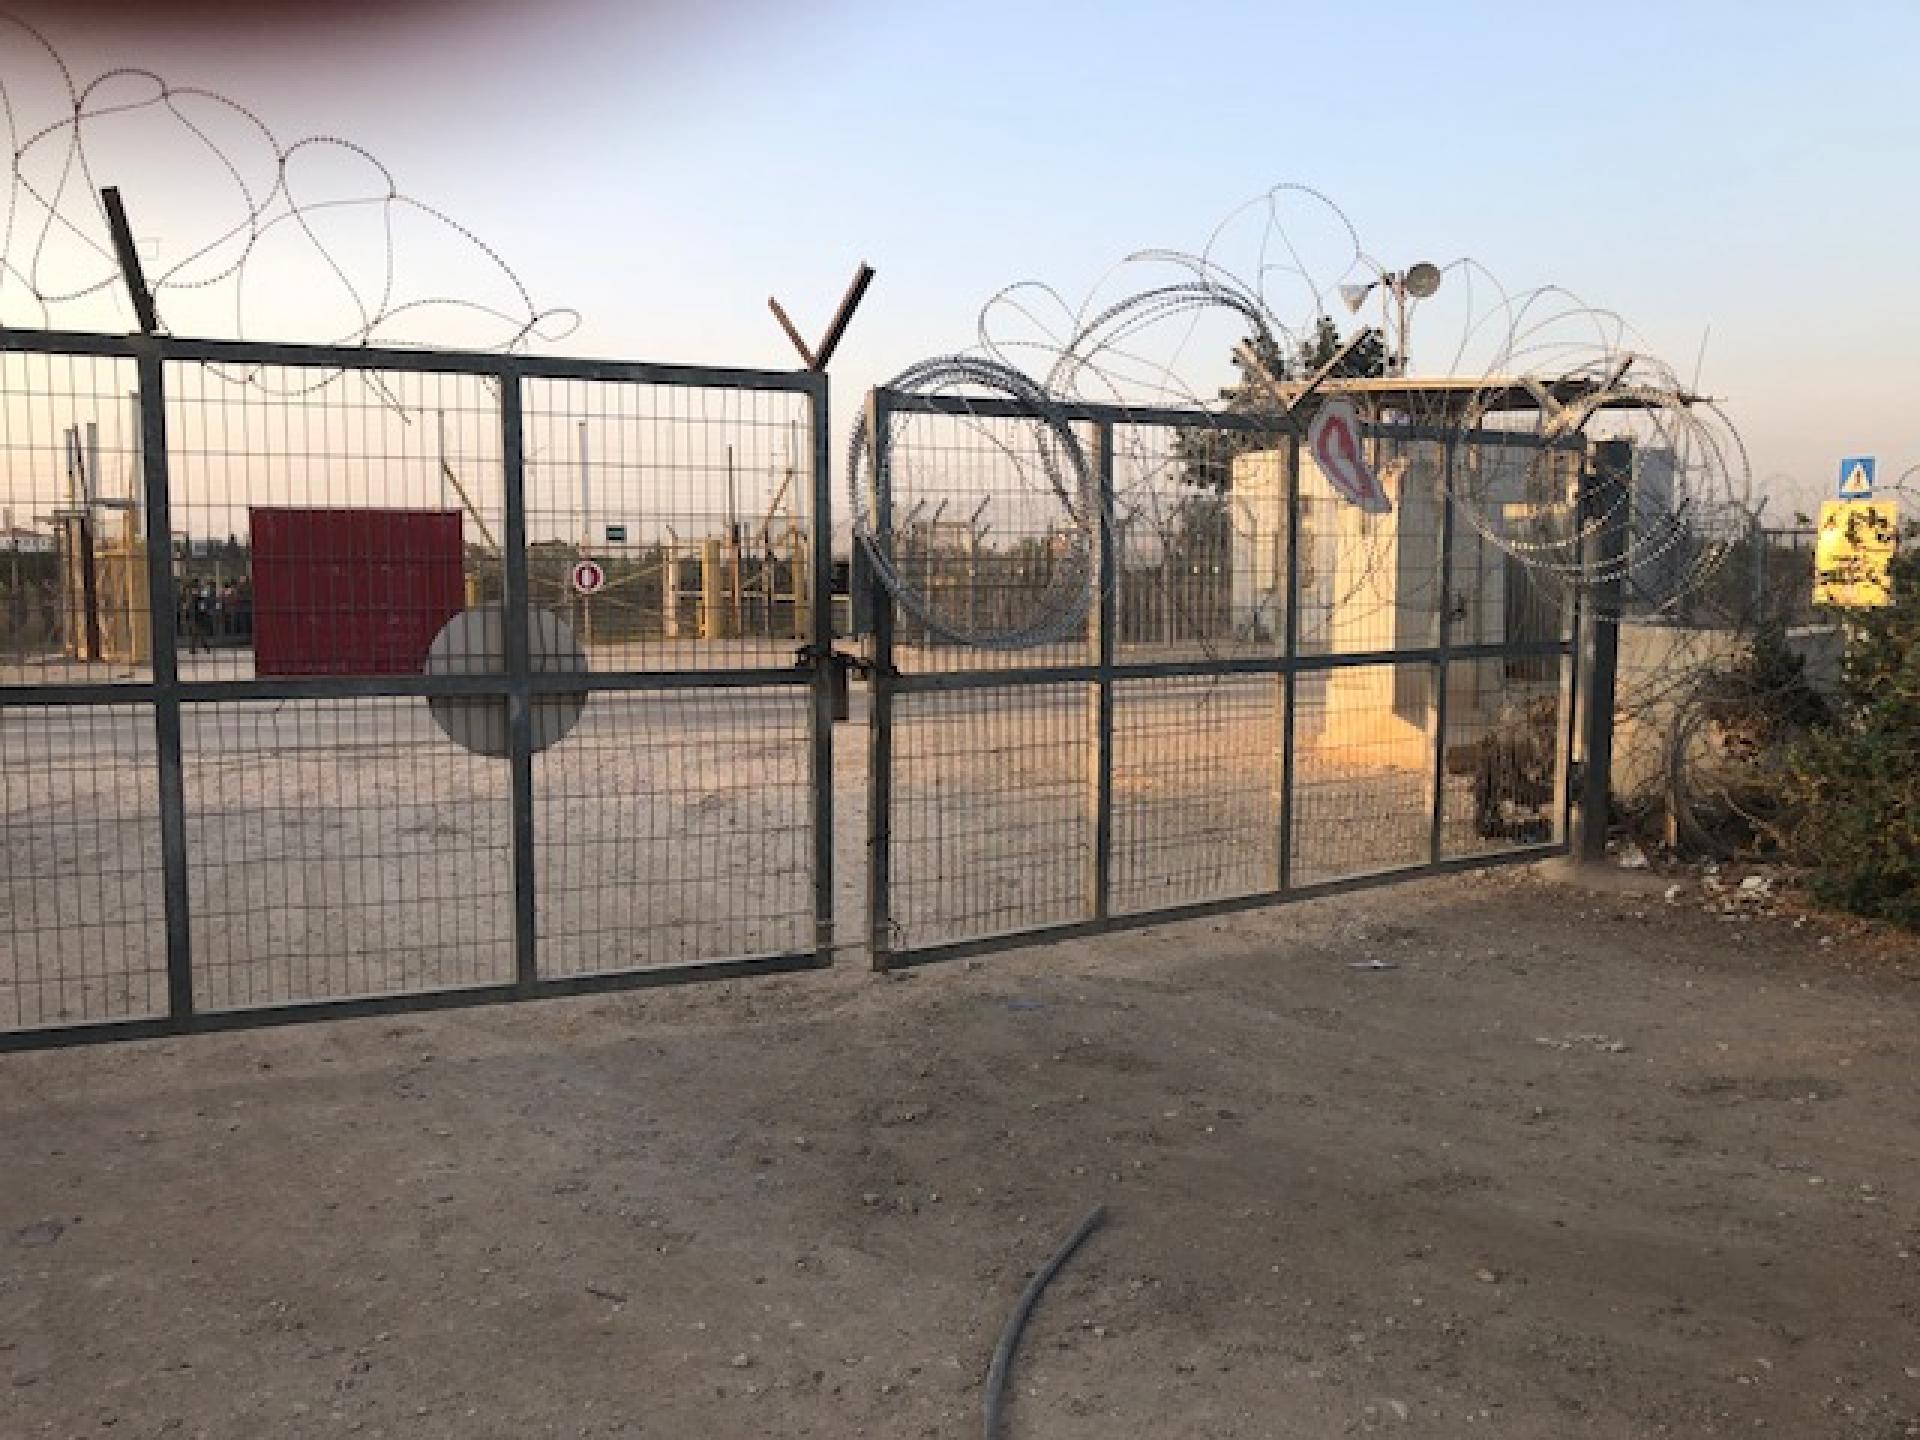 The Habla checkpoint with new barbed wire